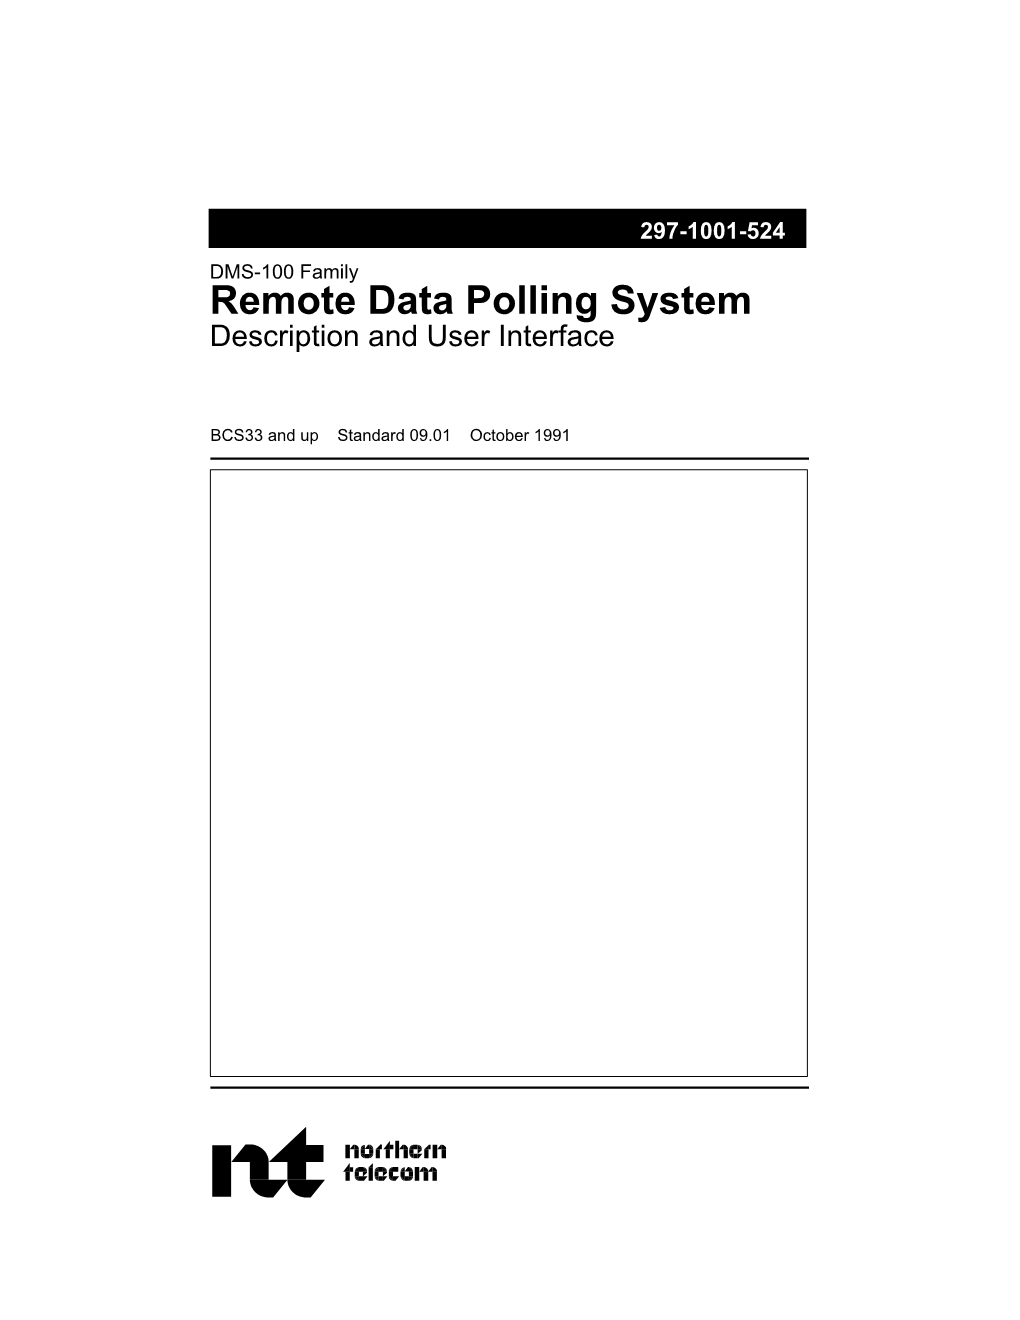 Remote Data Polling System Description and User Interface